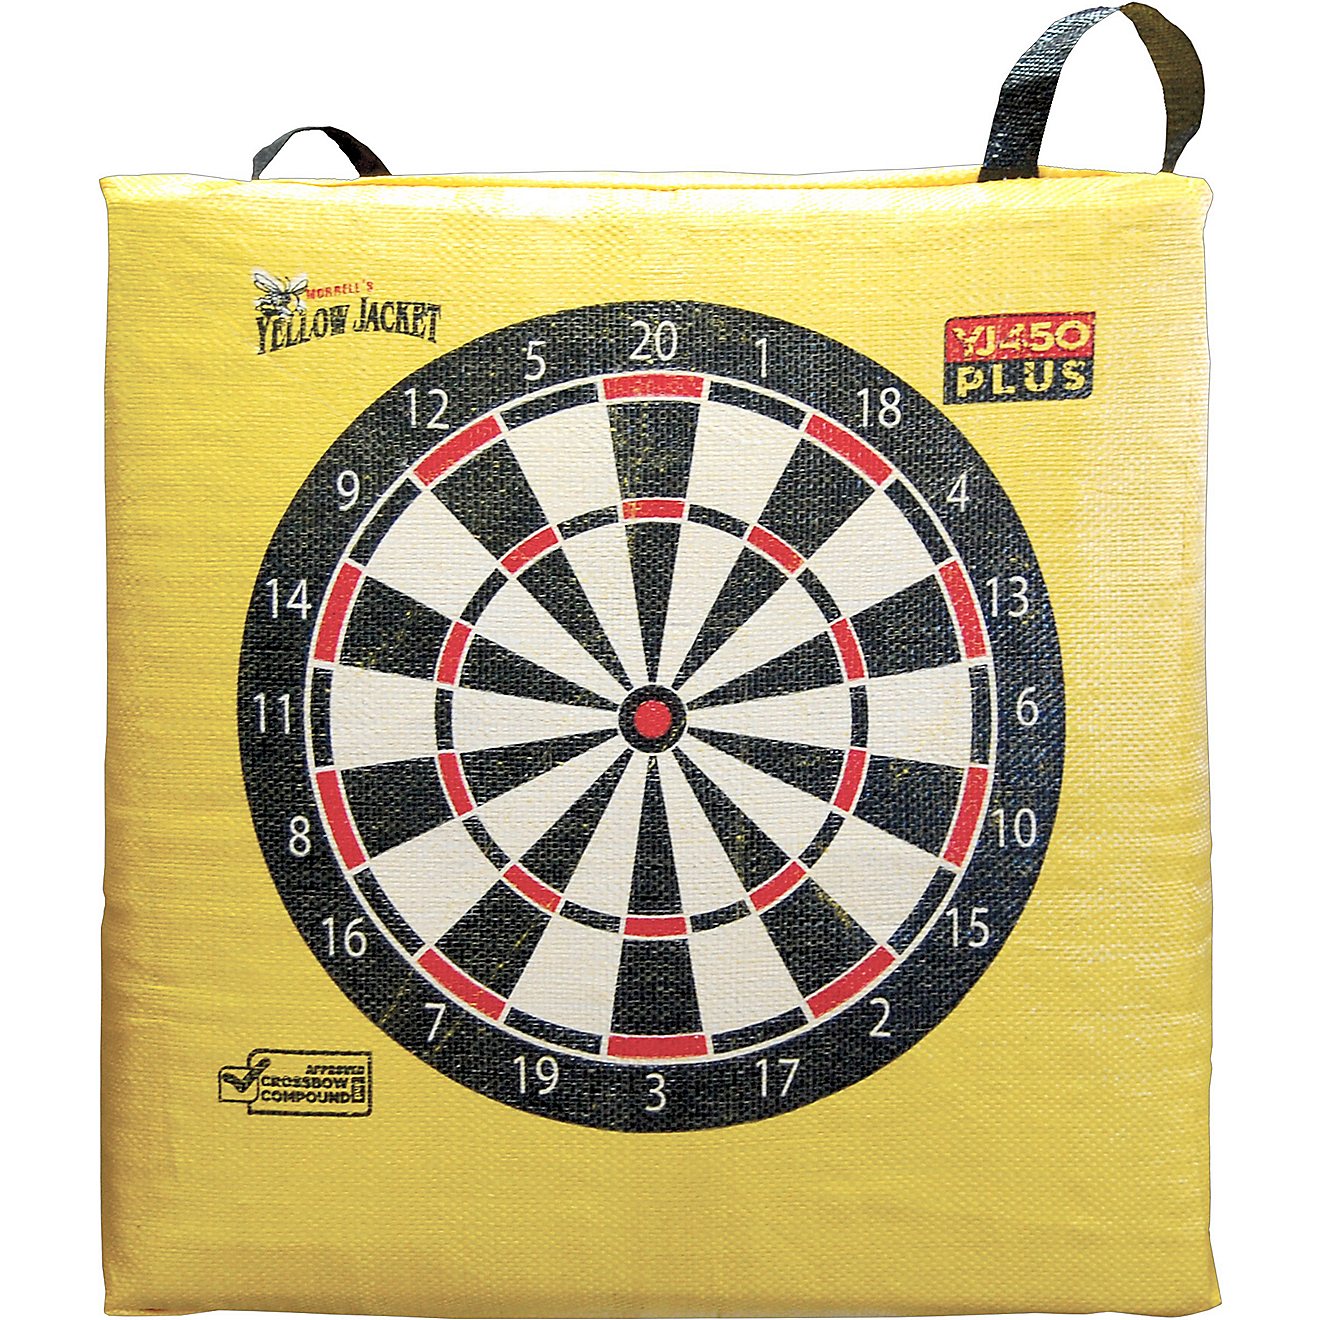 Morrell Yellow Jacket YJ-450 Plus Archery Target                                                                                 - view number 6